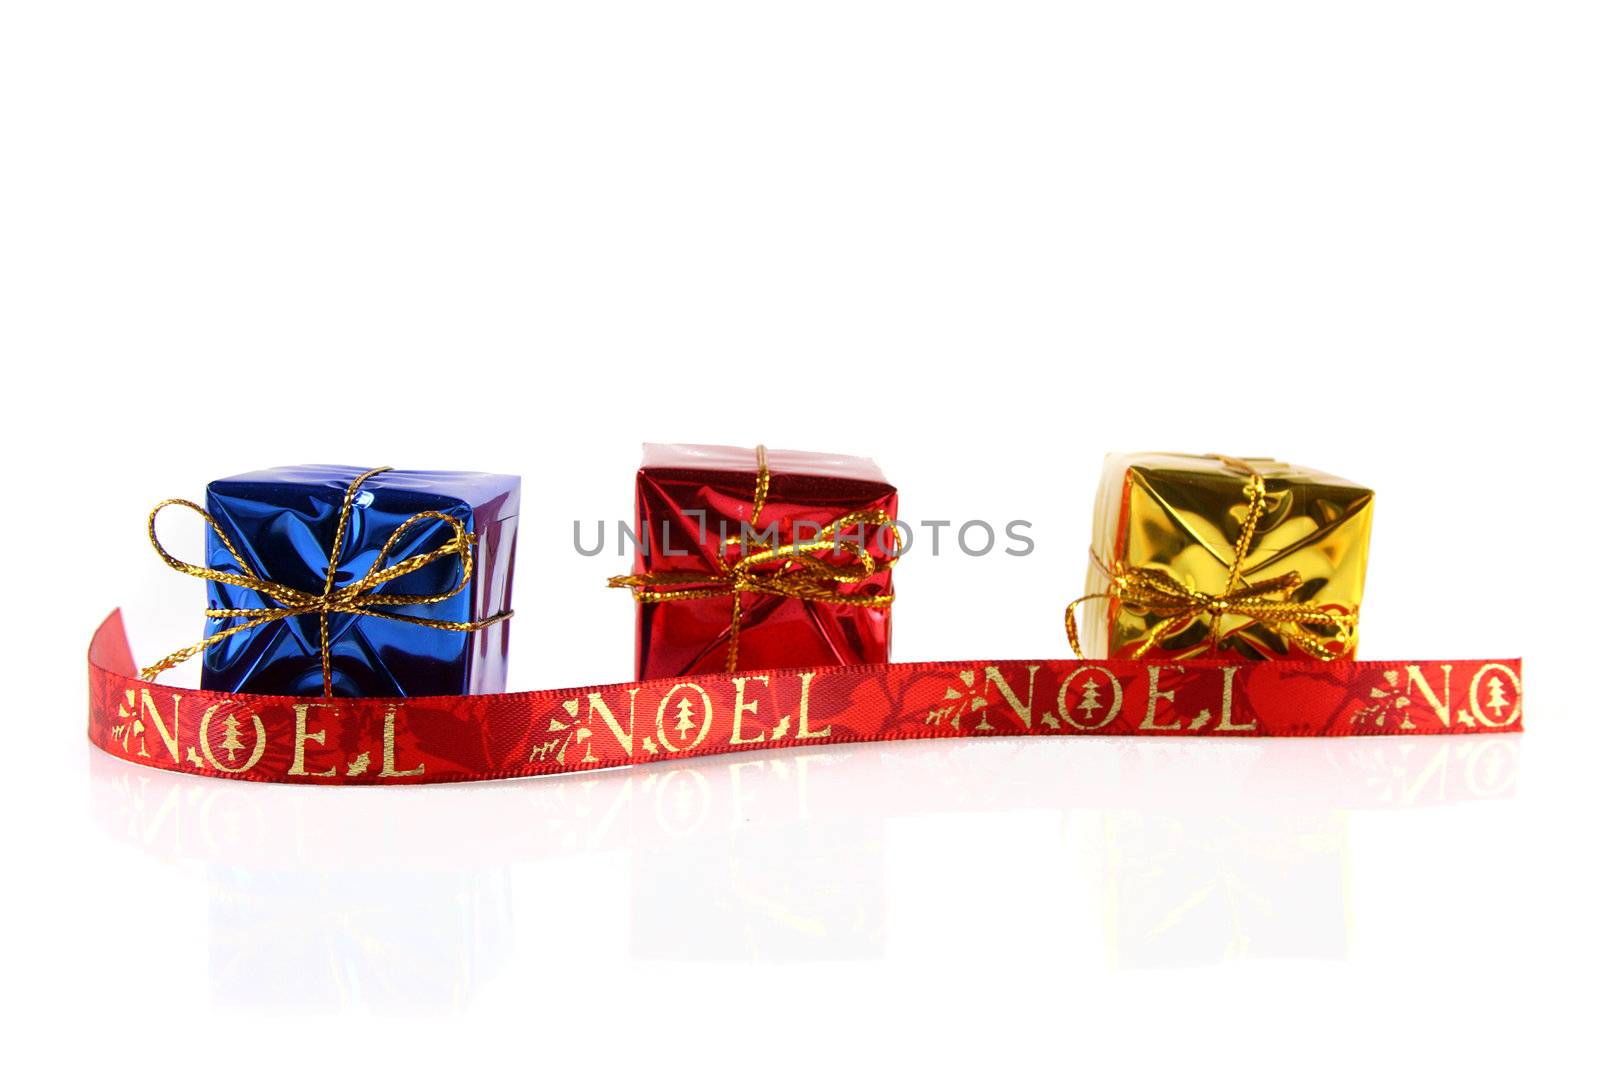 A studio shot on a solid white background of some holiday gifts and a decorative ribbon.